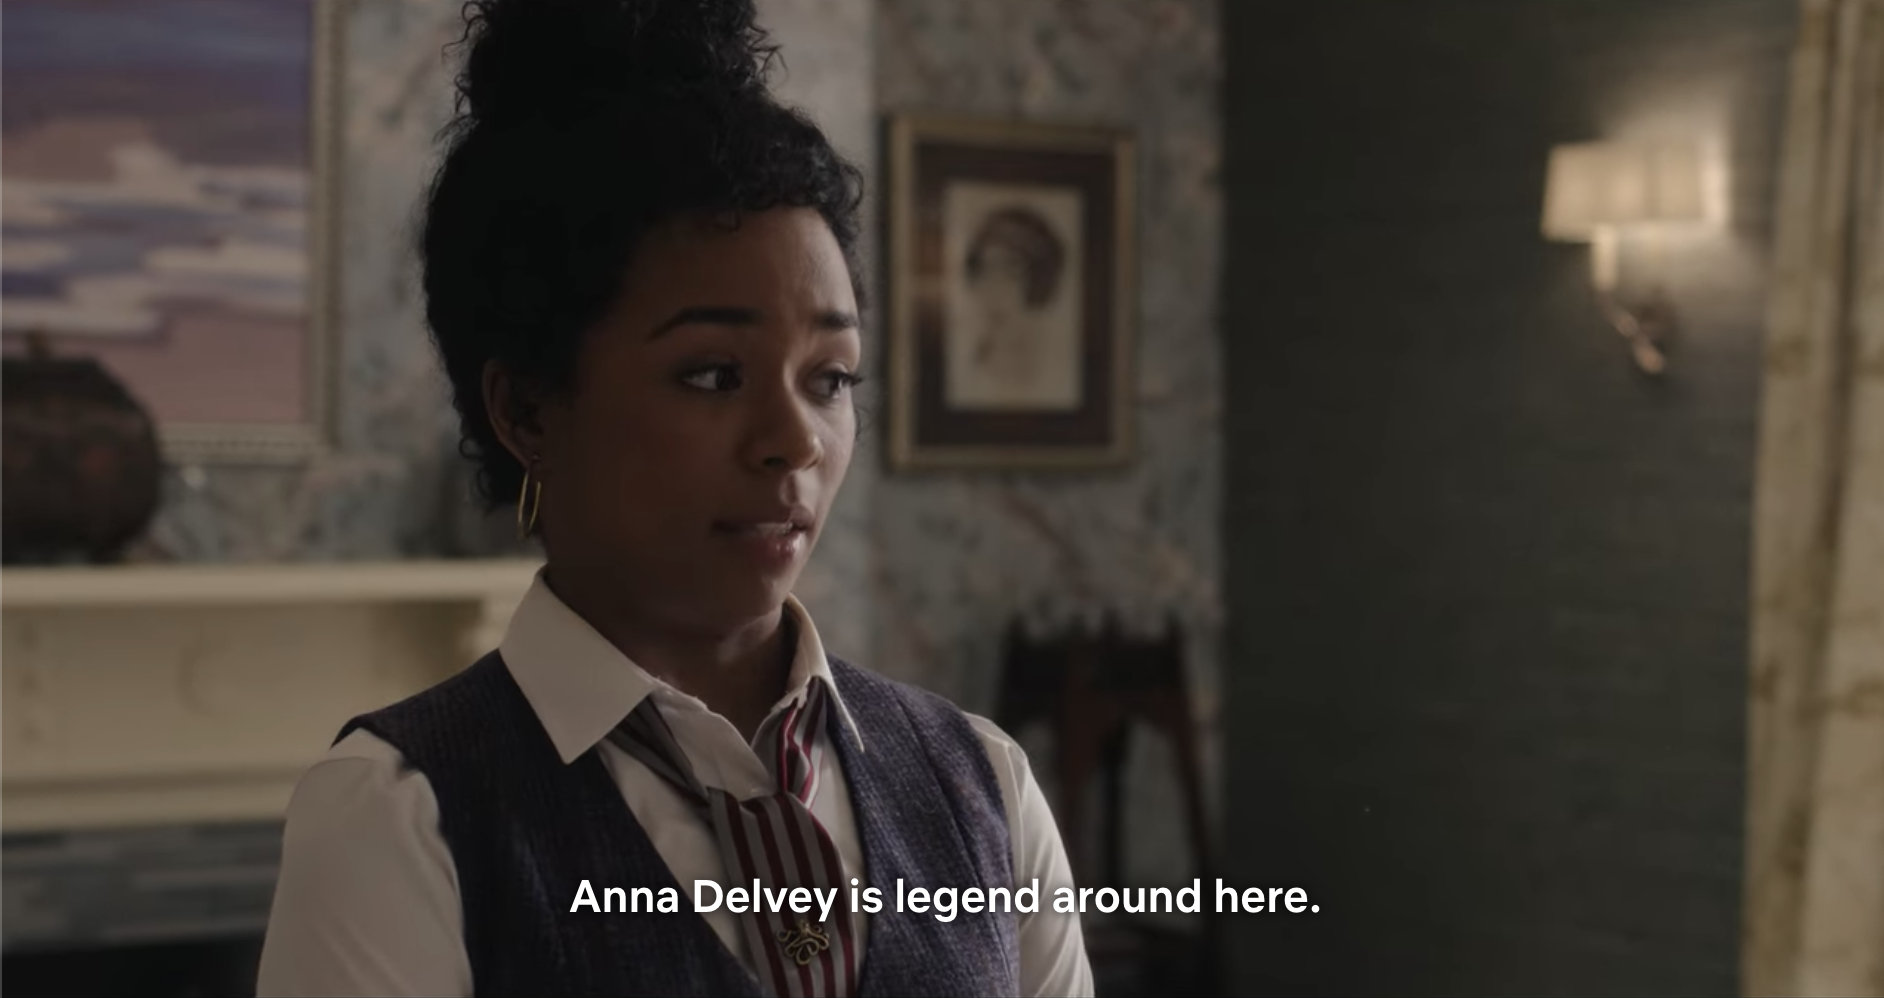 A housekeeper talking about how Anna is a legend